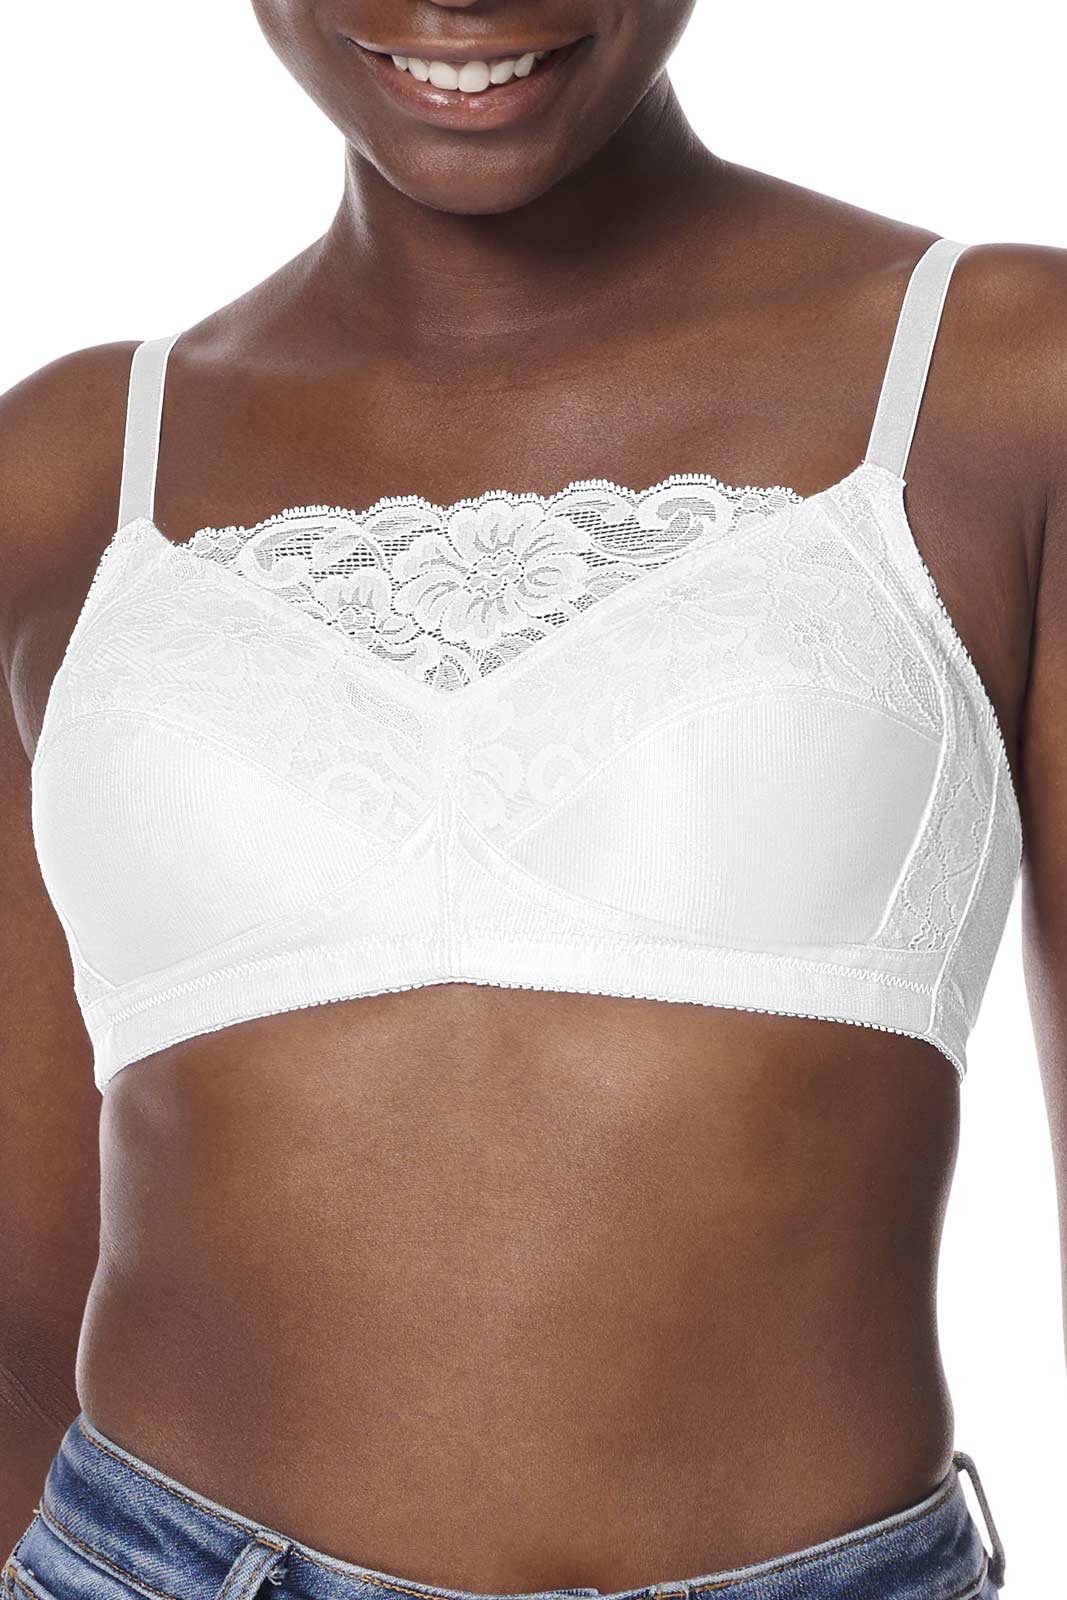 Post Mastectomy Bras and Prosthesis – Isabella Boutique